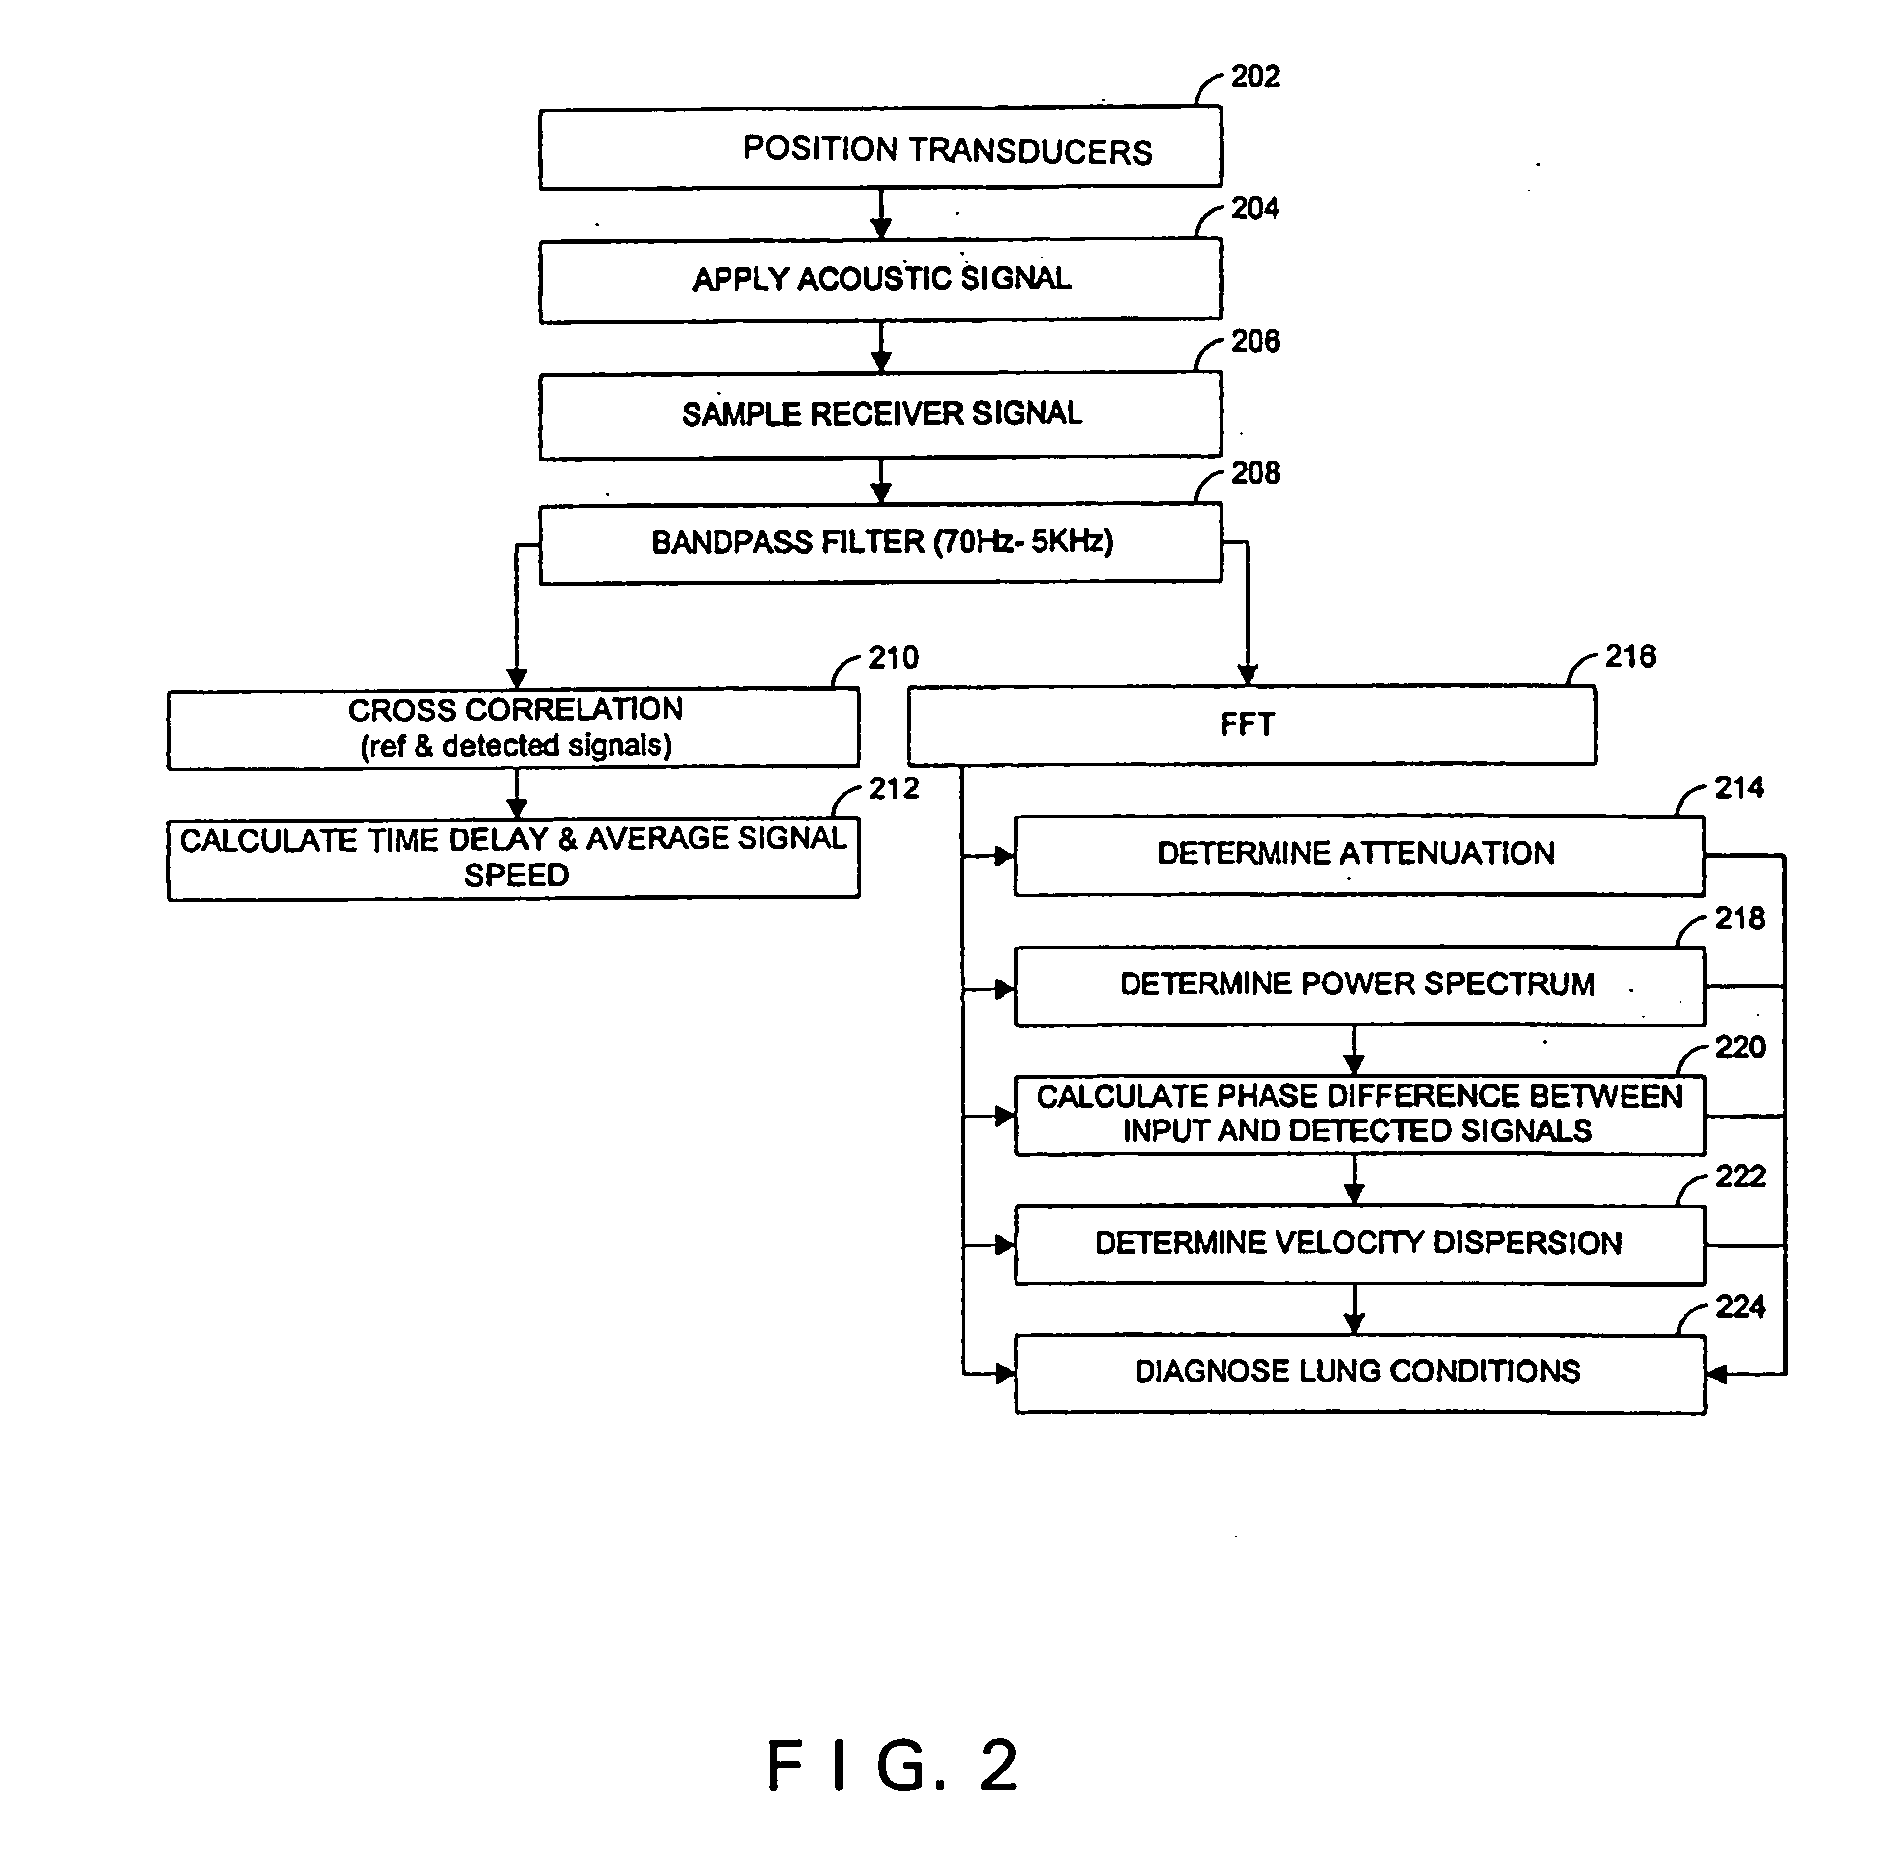 Devices and methods for tissue analysis